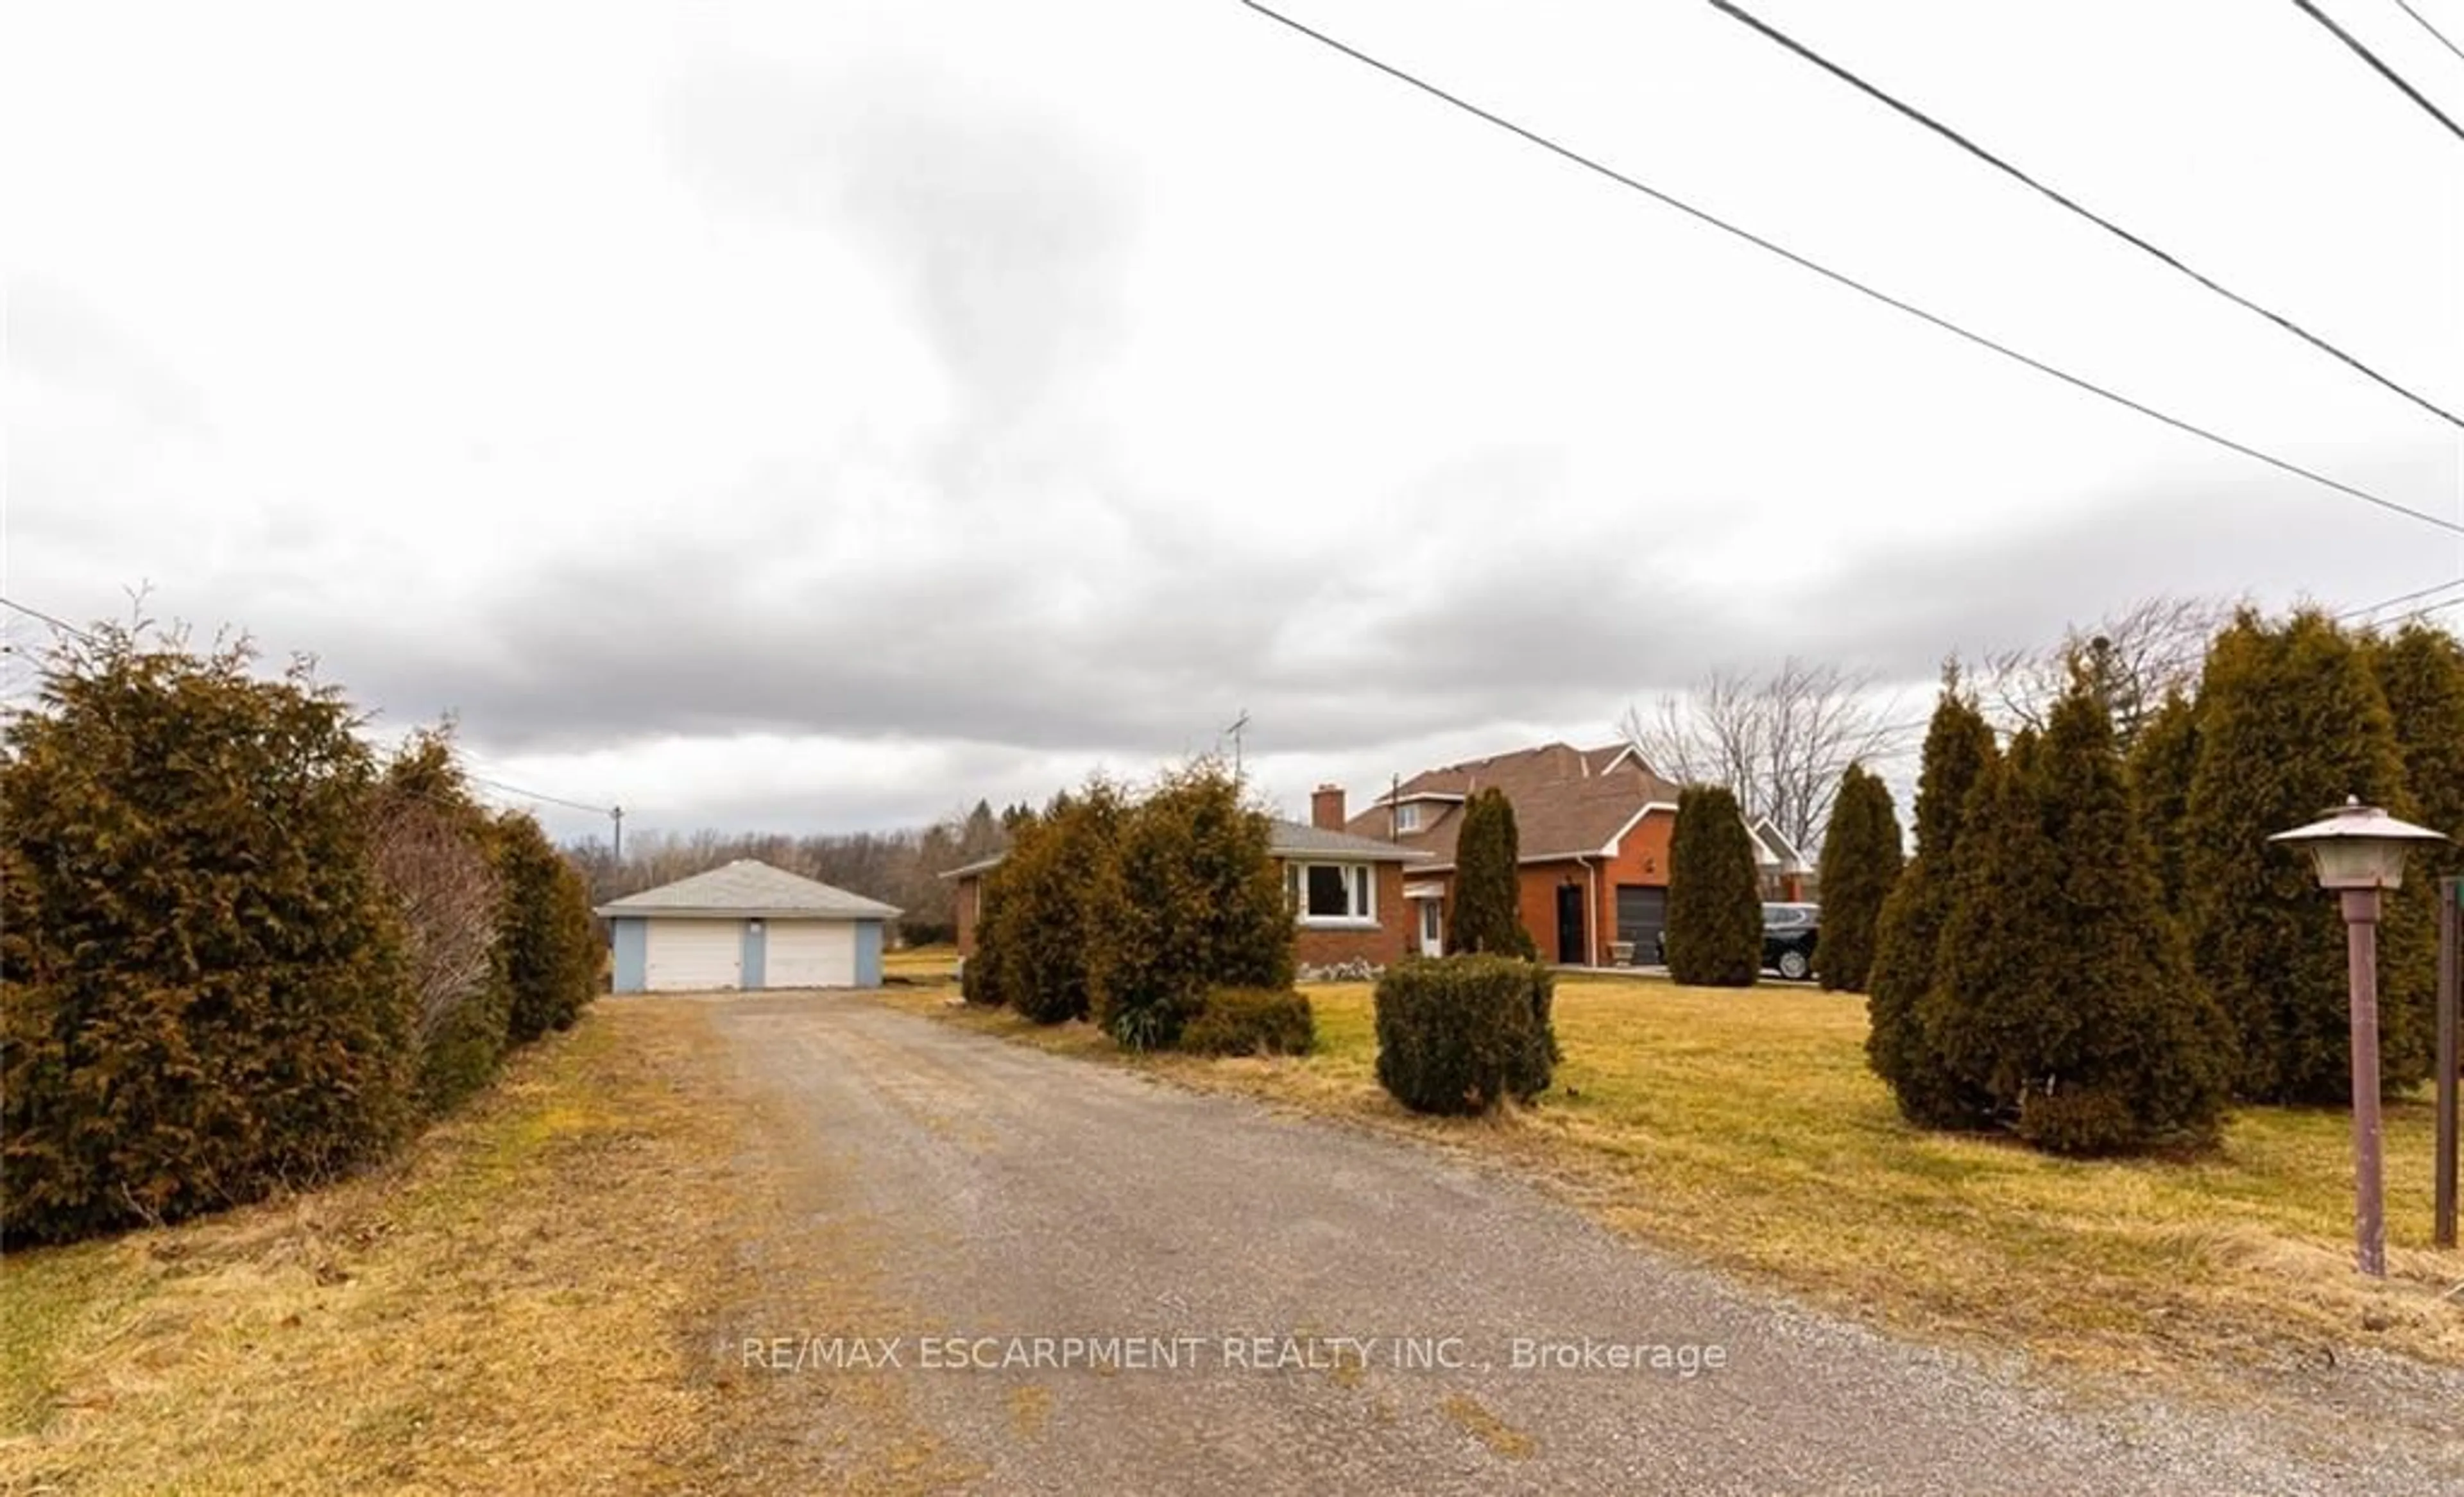 Street view for 590 Glover Rd, Hamilton Ontario L0R 1C0